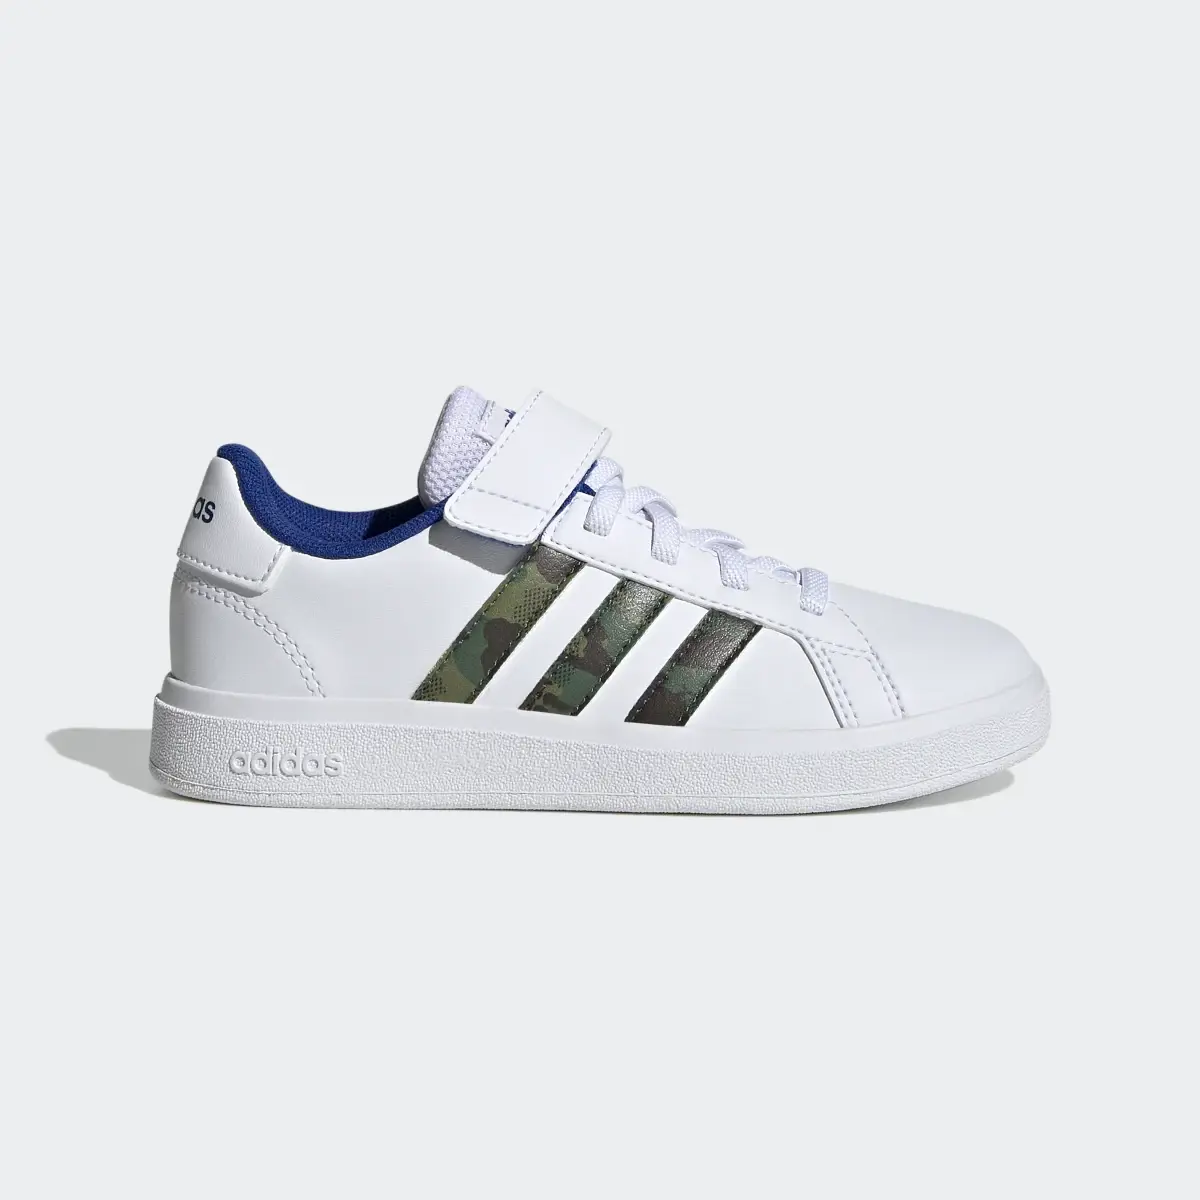 Adidas Grand Court Lifestyle Court Elastic Lace and Top Strap Shoes. 2